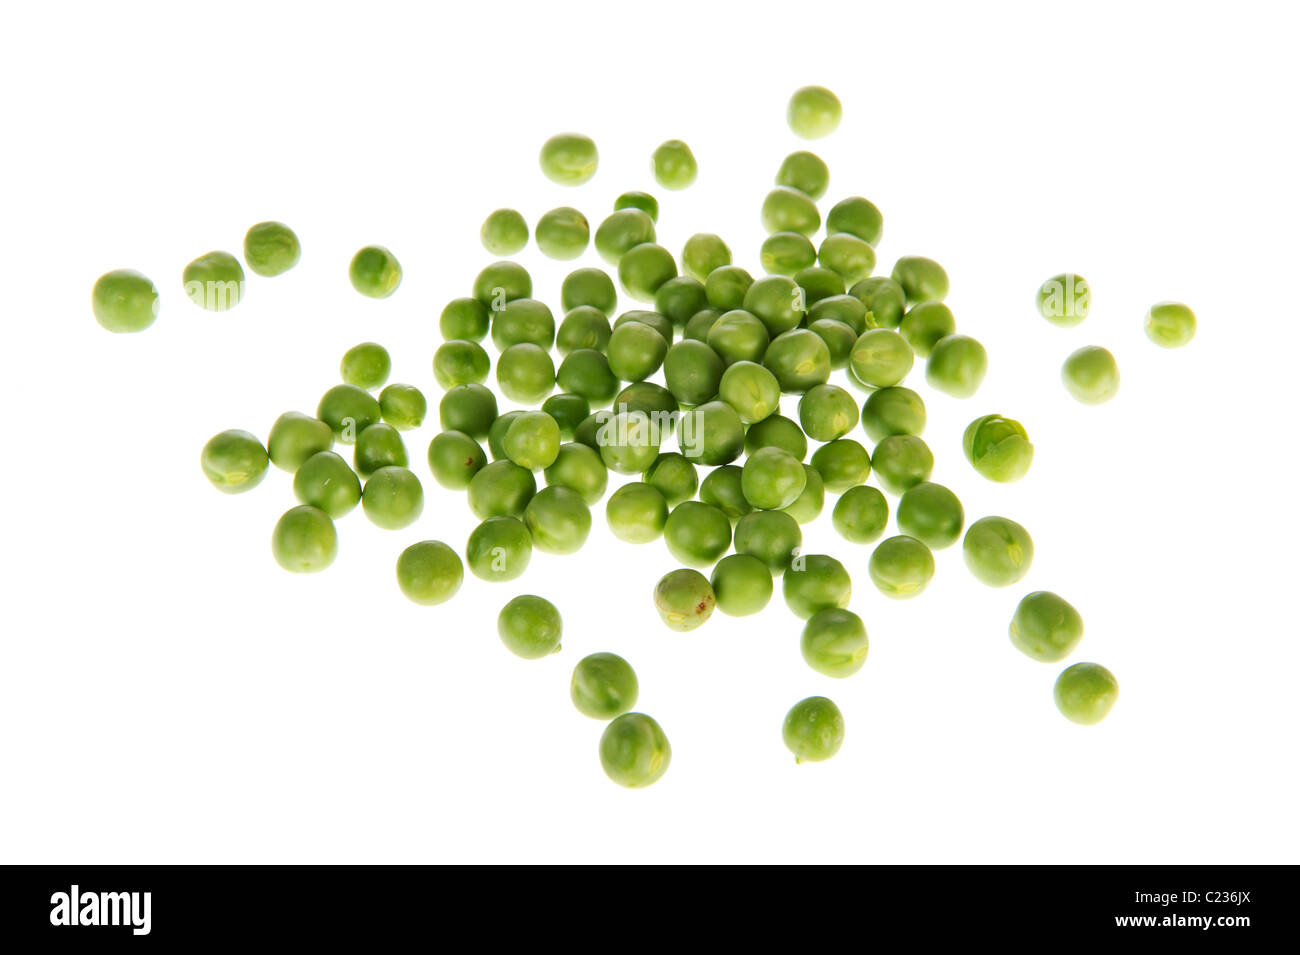 Many green peas isolated on white background Stock Photo